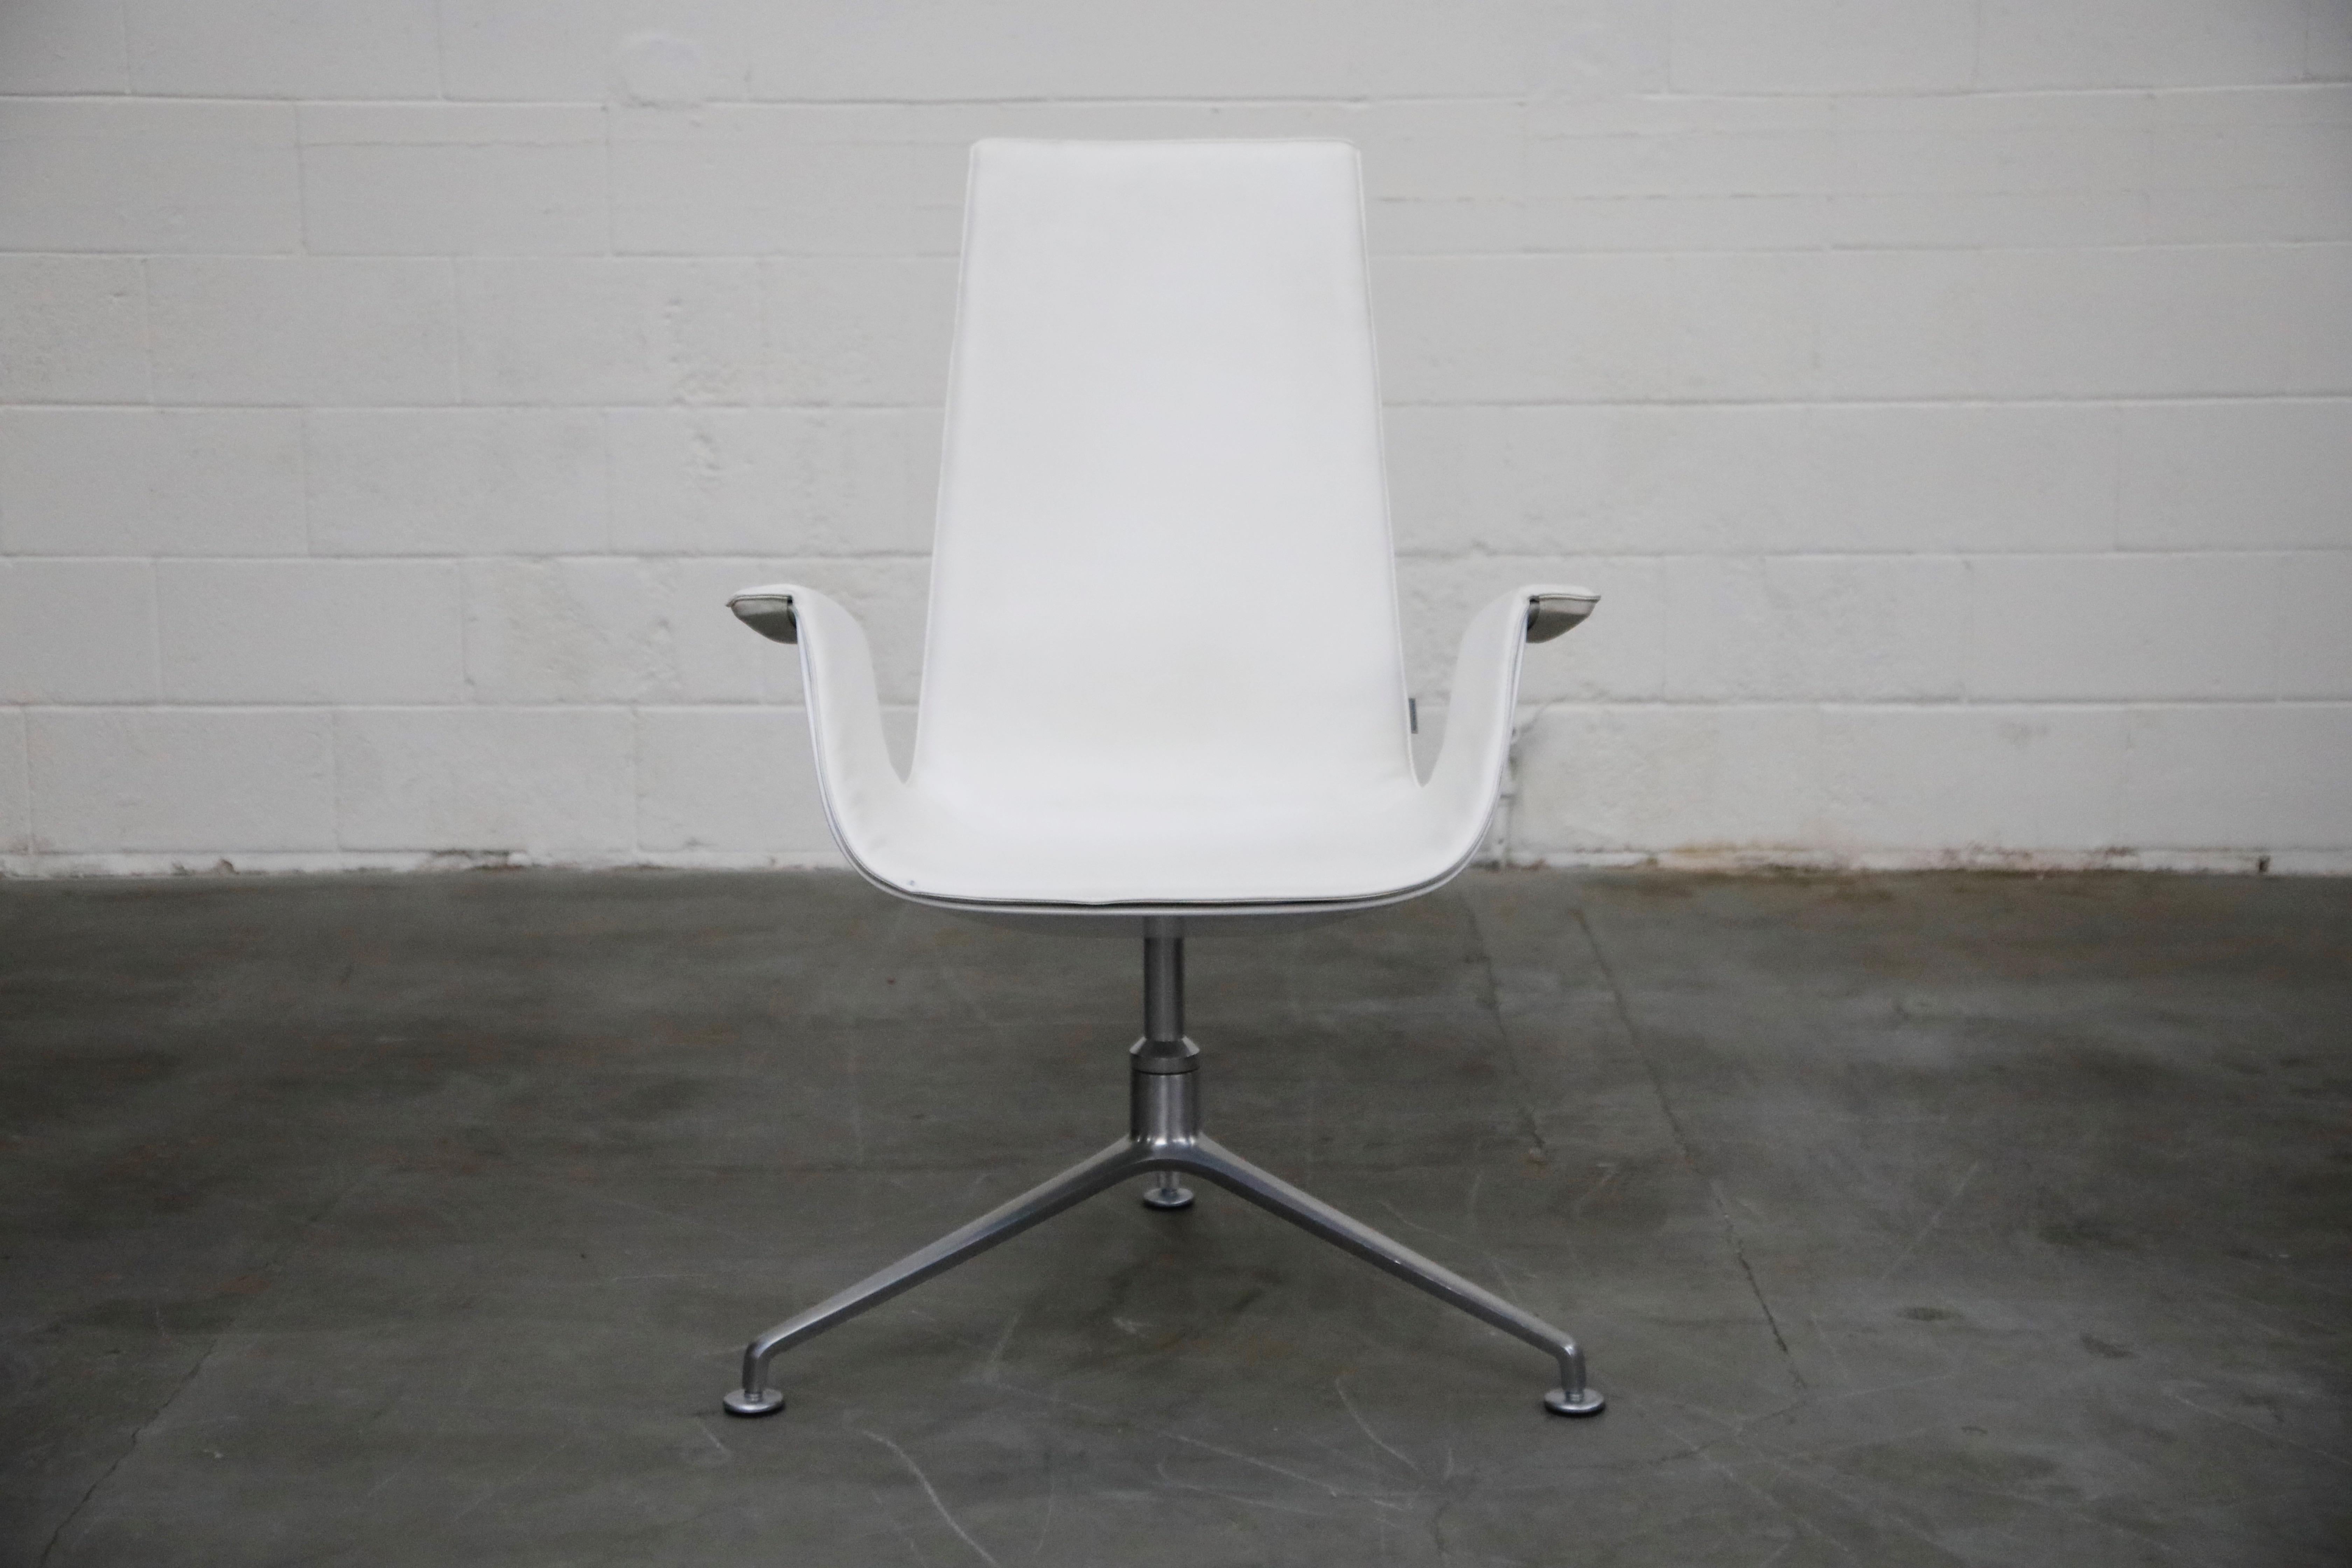 High-back swivel example of the extremely popular-amongst-designers and collectors, white leather 'Bird' chair model # FK-6727, also commonly referred to as the 'Tulip' bucket chair, designed by Preben Fabricius and Jørgen Kastholm, manufactured in